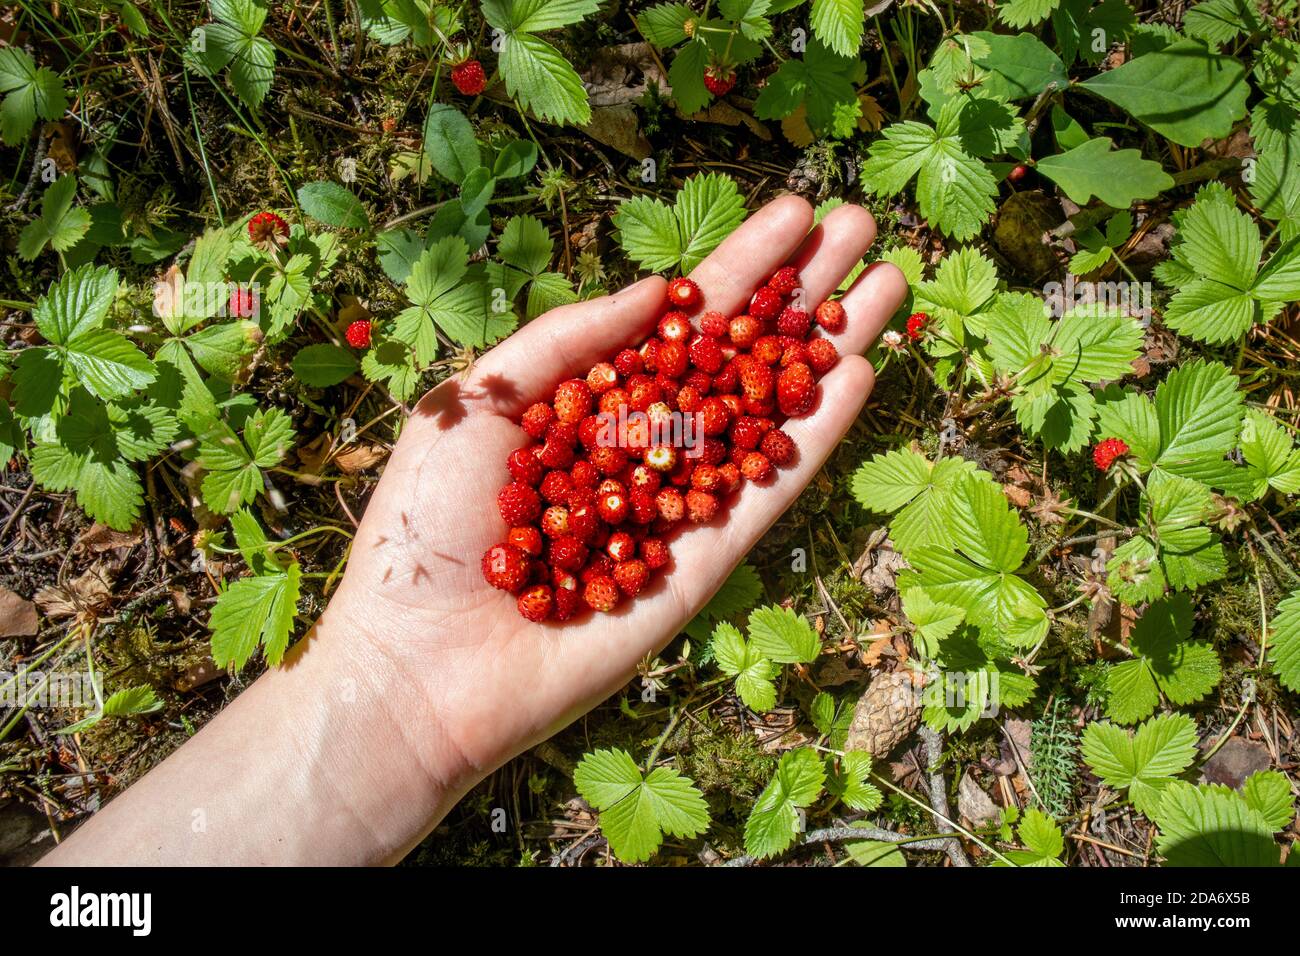 Fresh picked wild strawberries in woman hand. Handful of ripe berries. Berry picking in forest. Summer time. Healthy organic food concept. Plants. Stock Photo